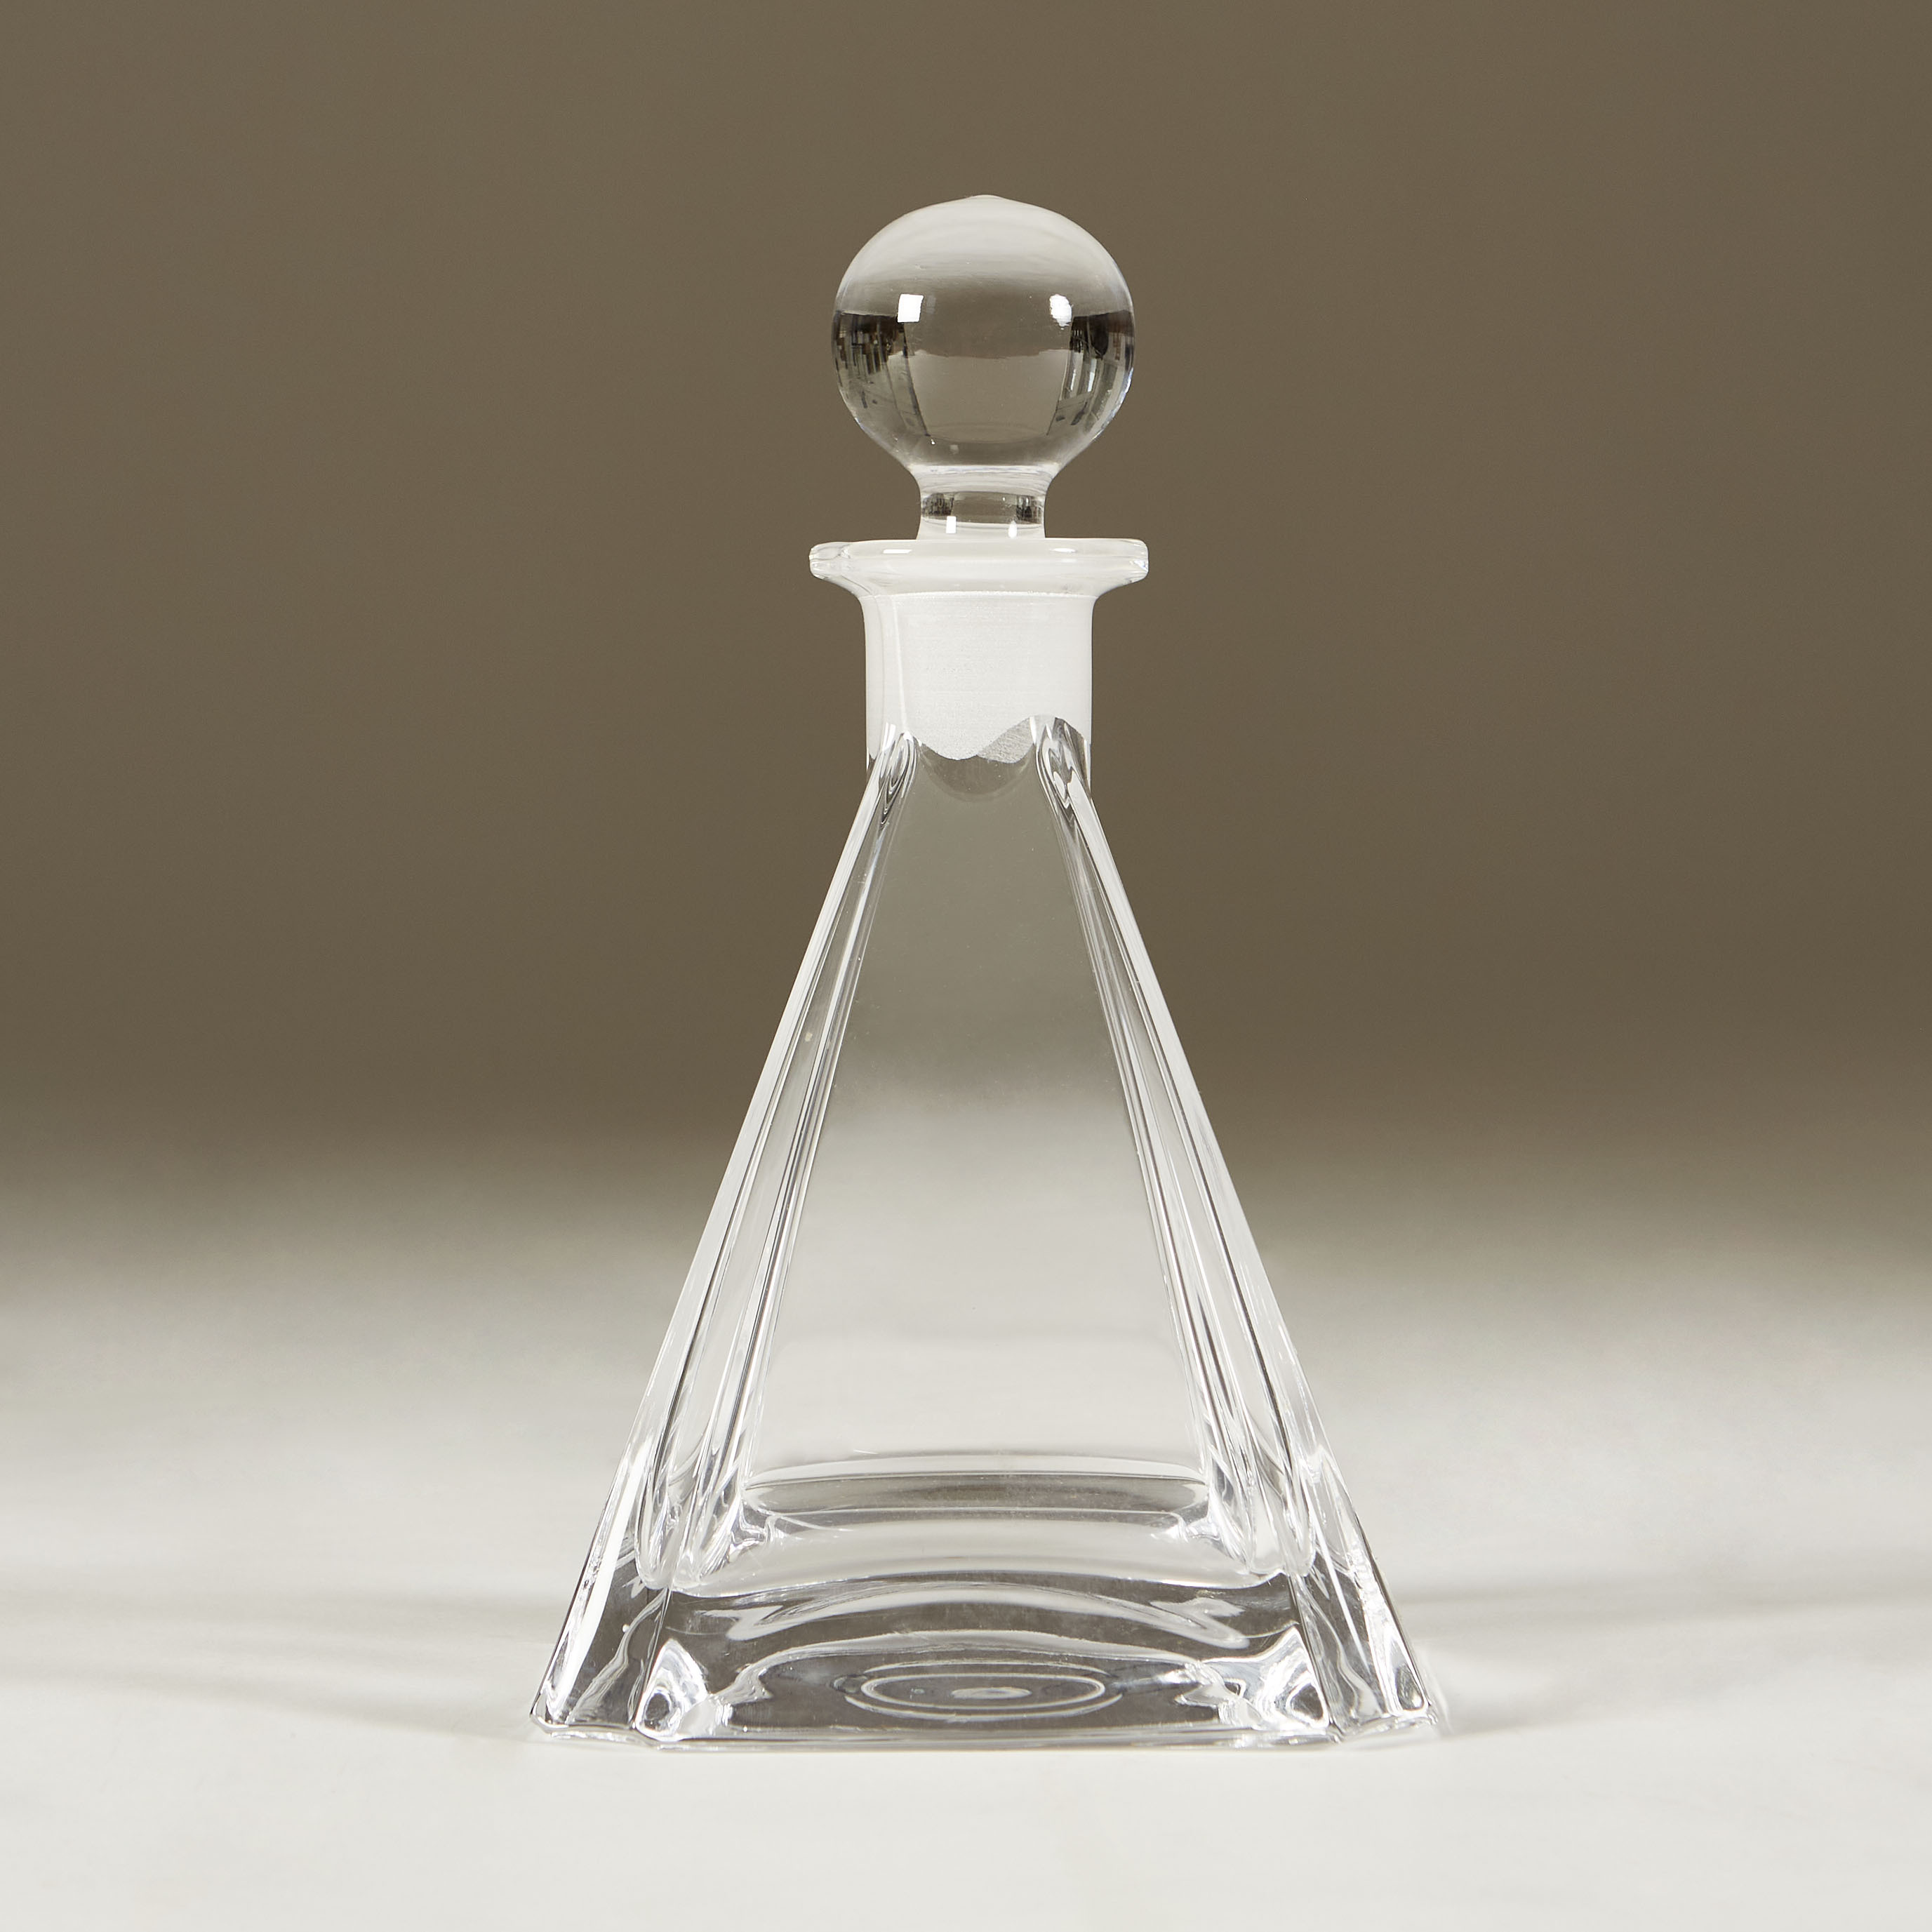 The image for Us Decanter 0079 V1